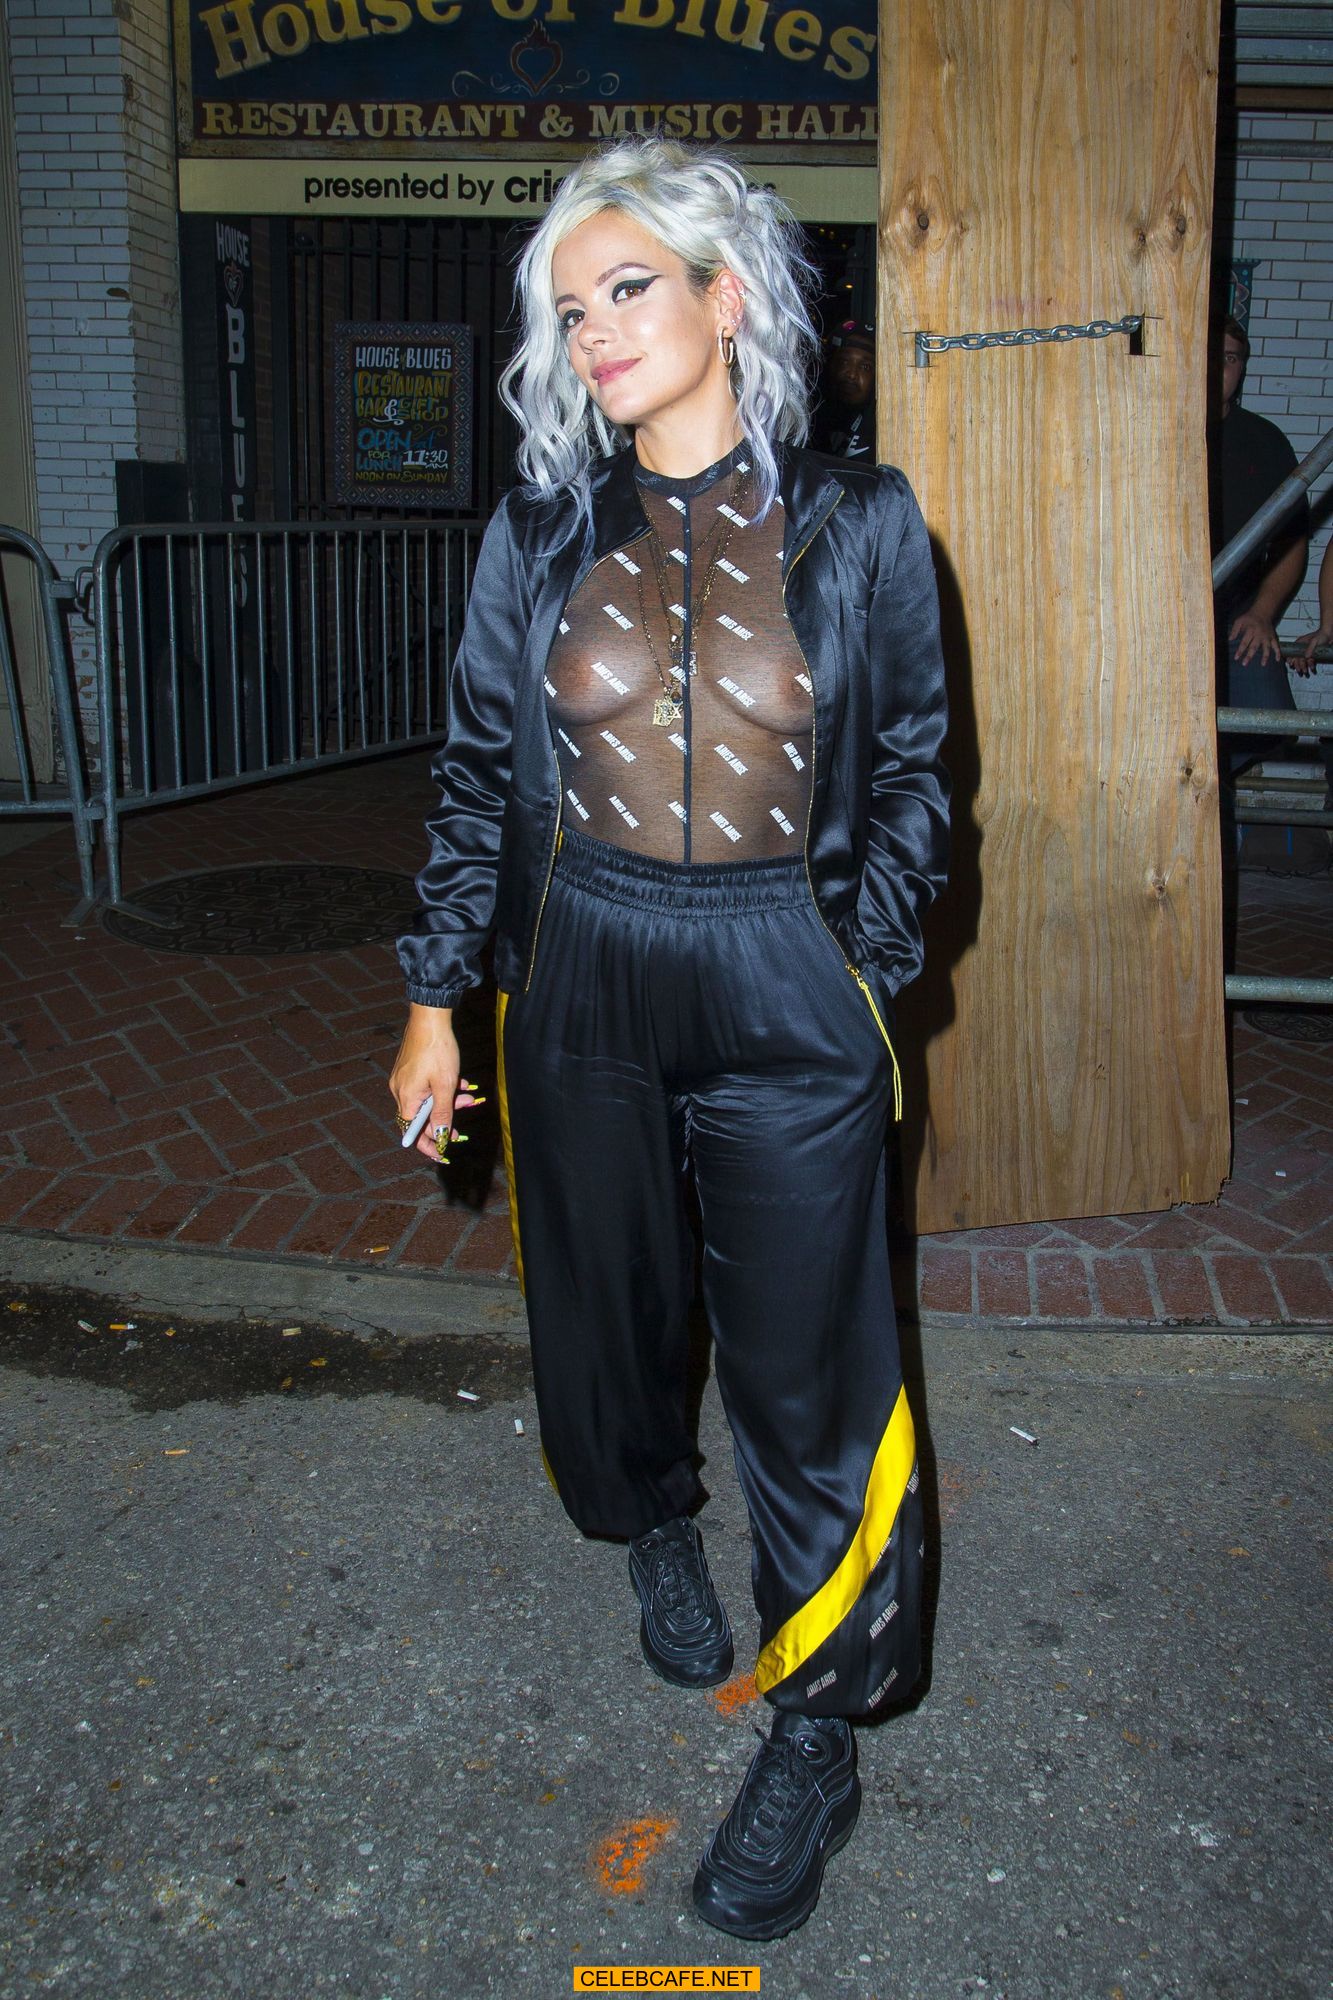 lily_allen_outside_the_house_of_blues_in_new_orleans_10_16_18_14.jpg